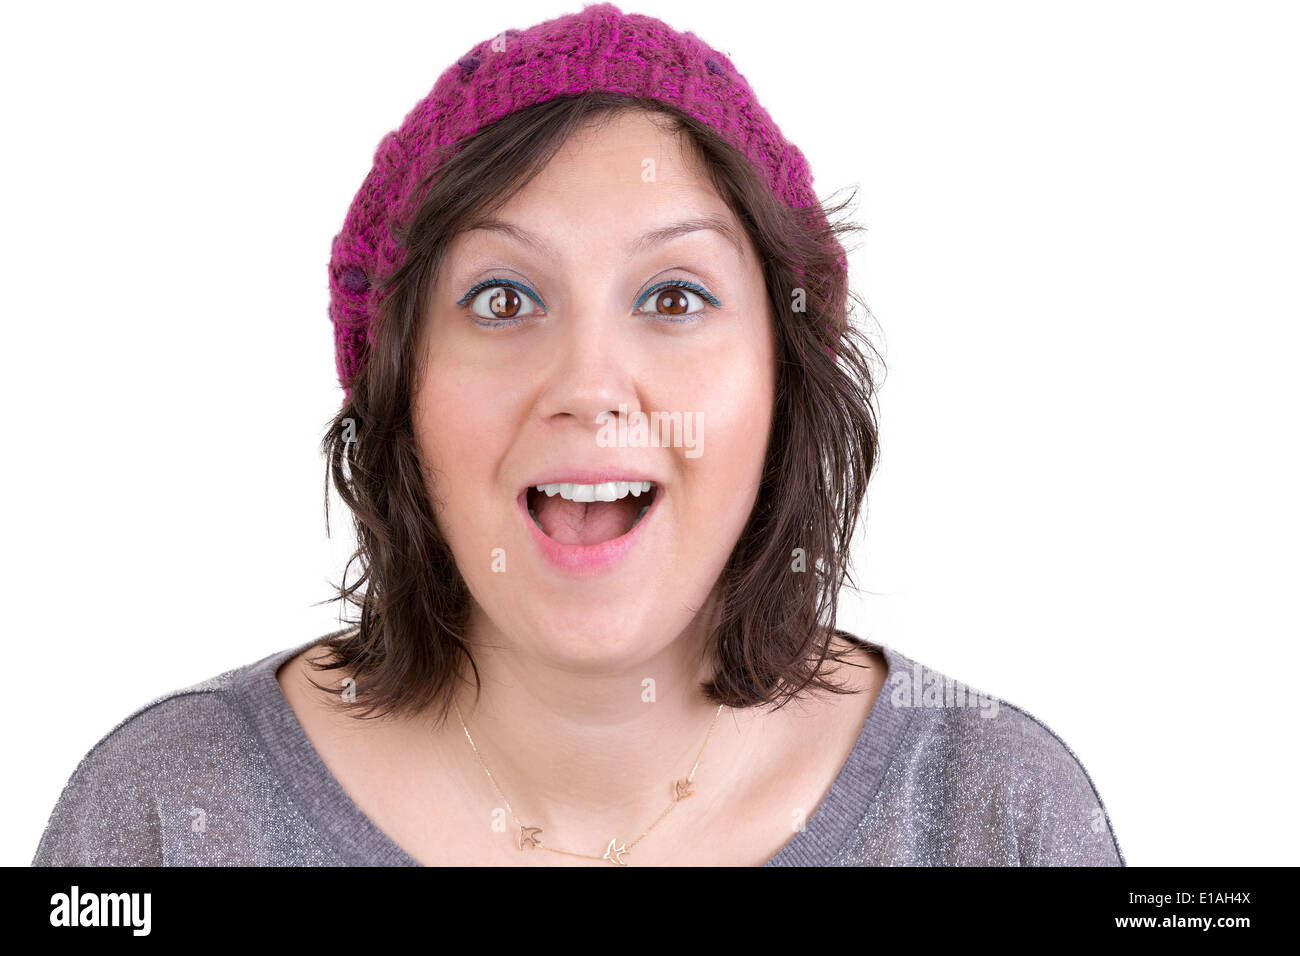 Attractive woman in a knitted cap reacting in delight and pleasure with sparkling eyes and her mouth open wide, isolated on whit Stock Photo